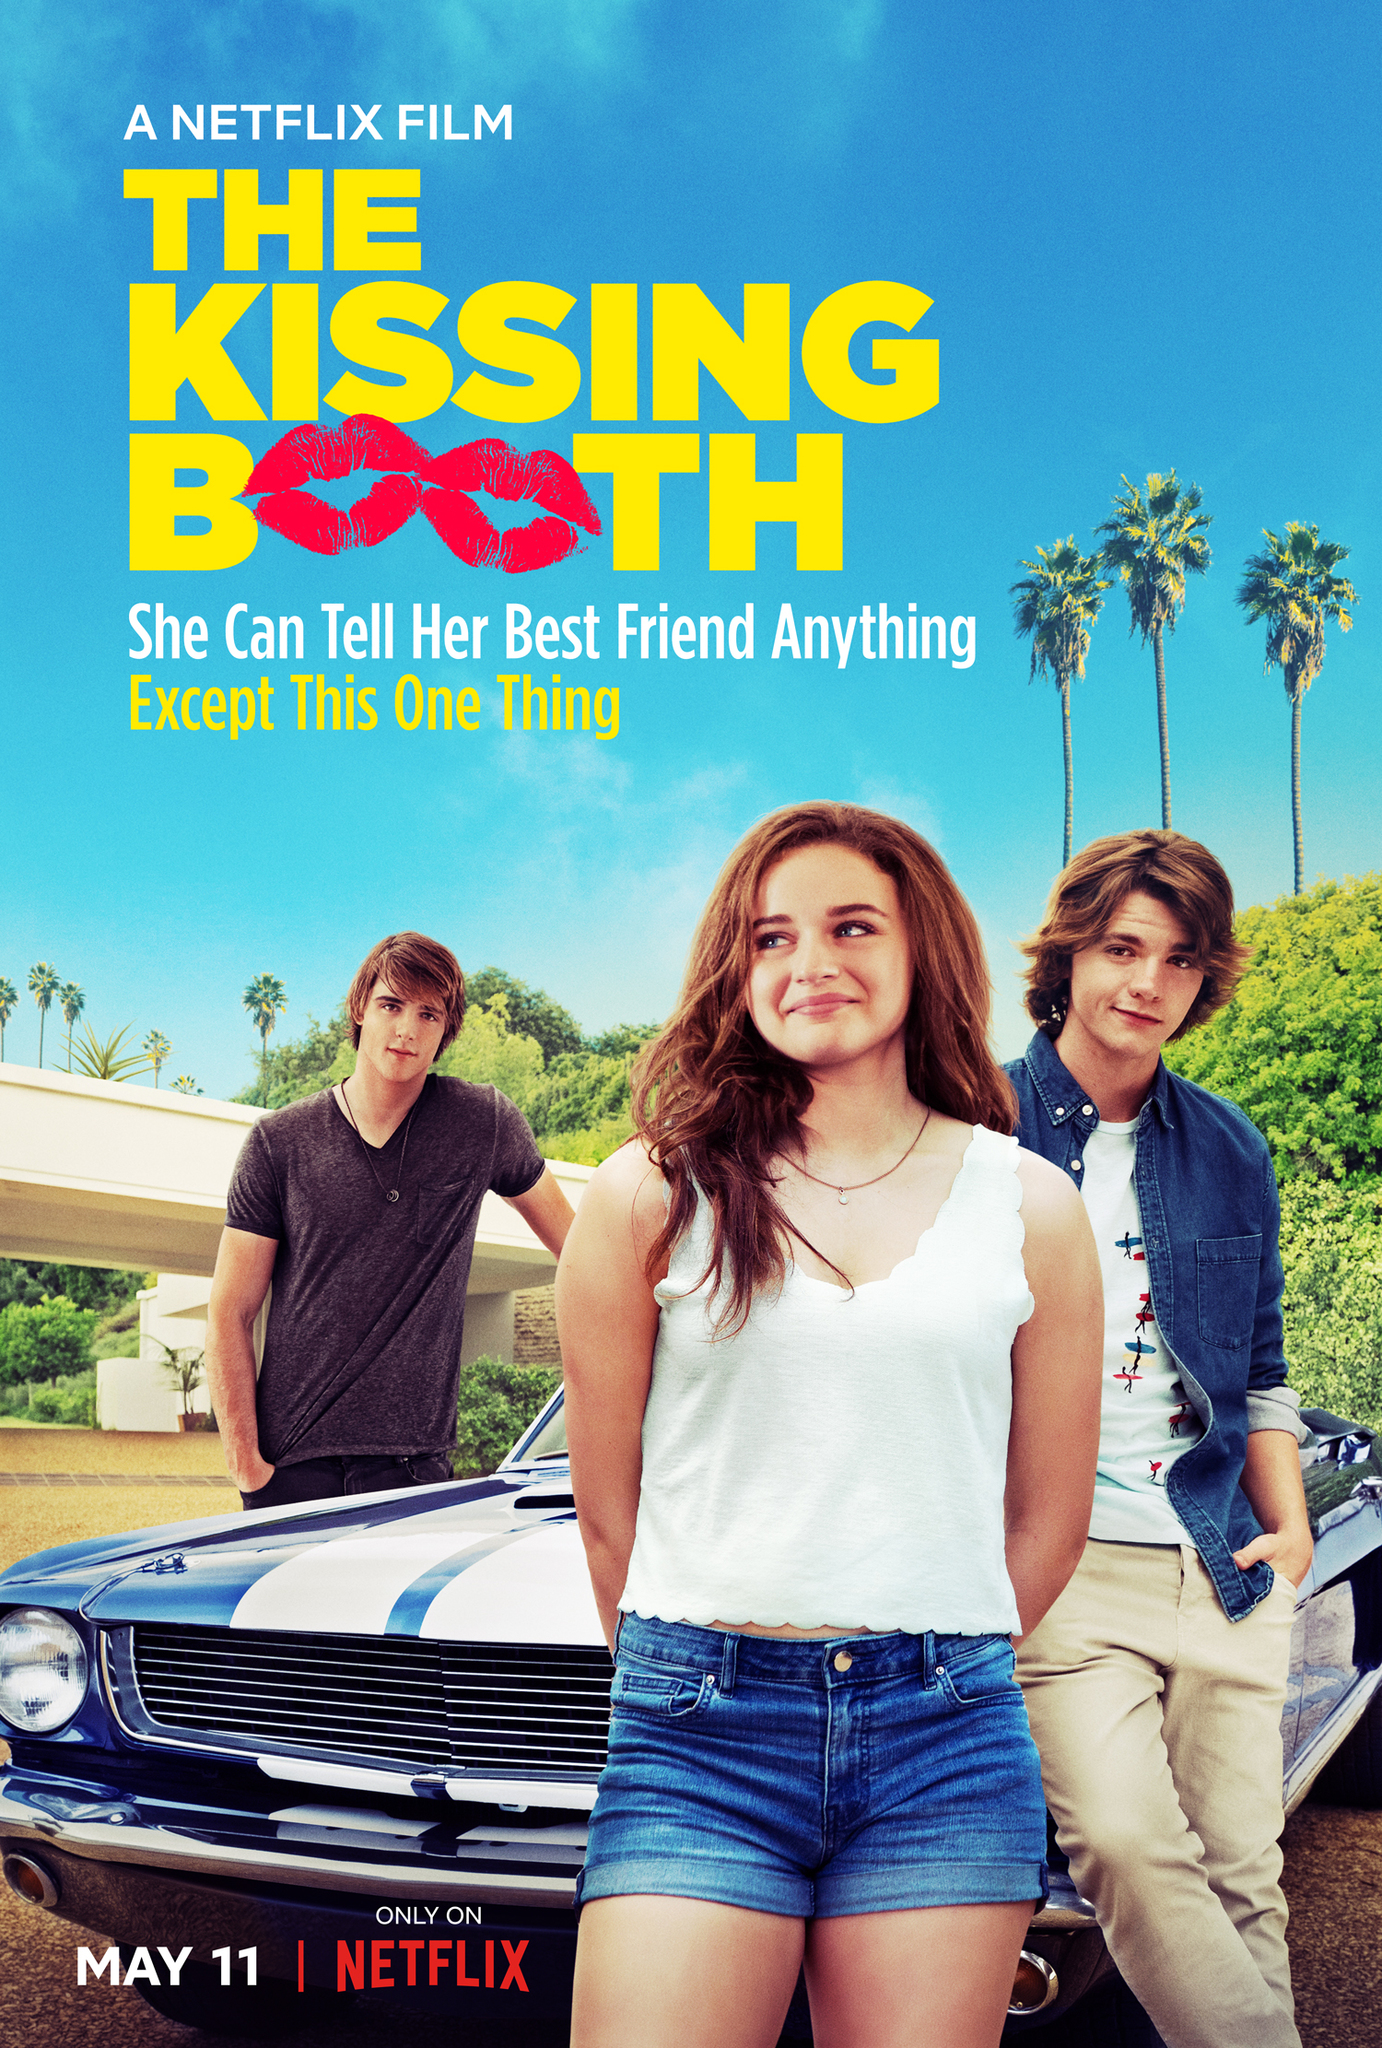 Sexiest Movies on Netflix - The Kissing Booth